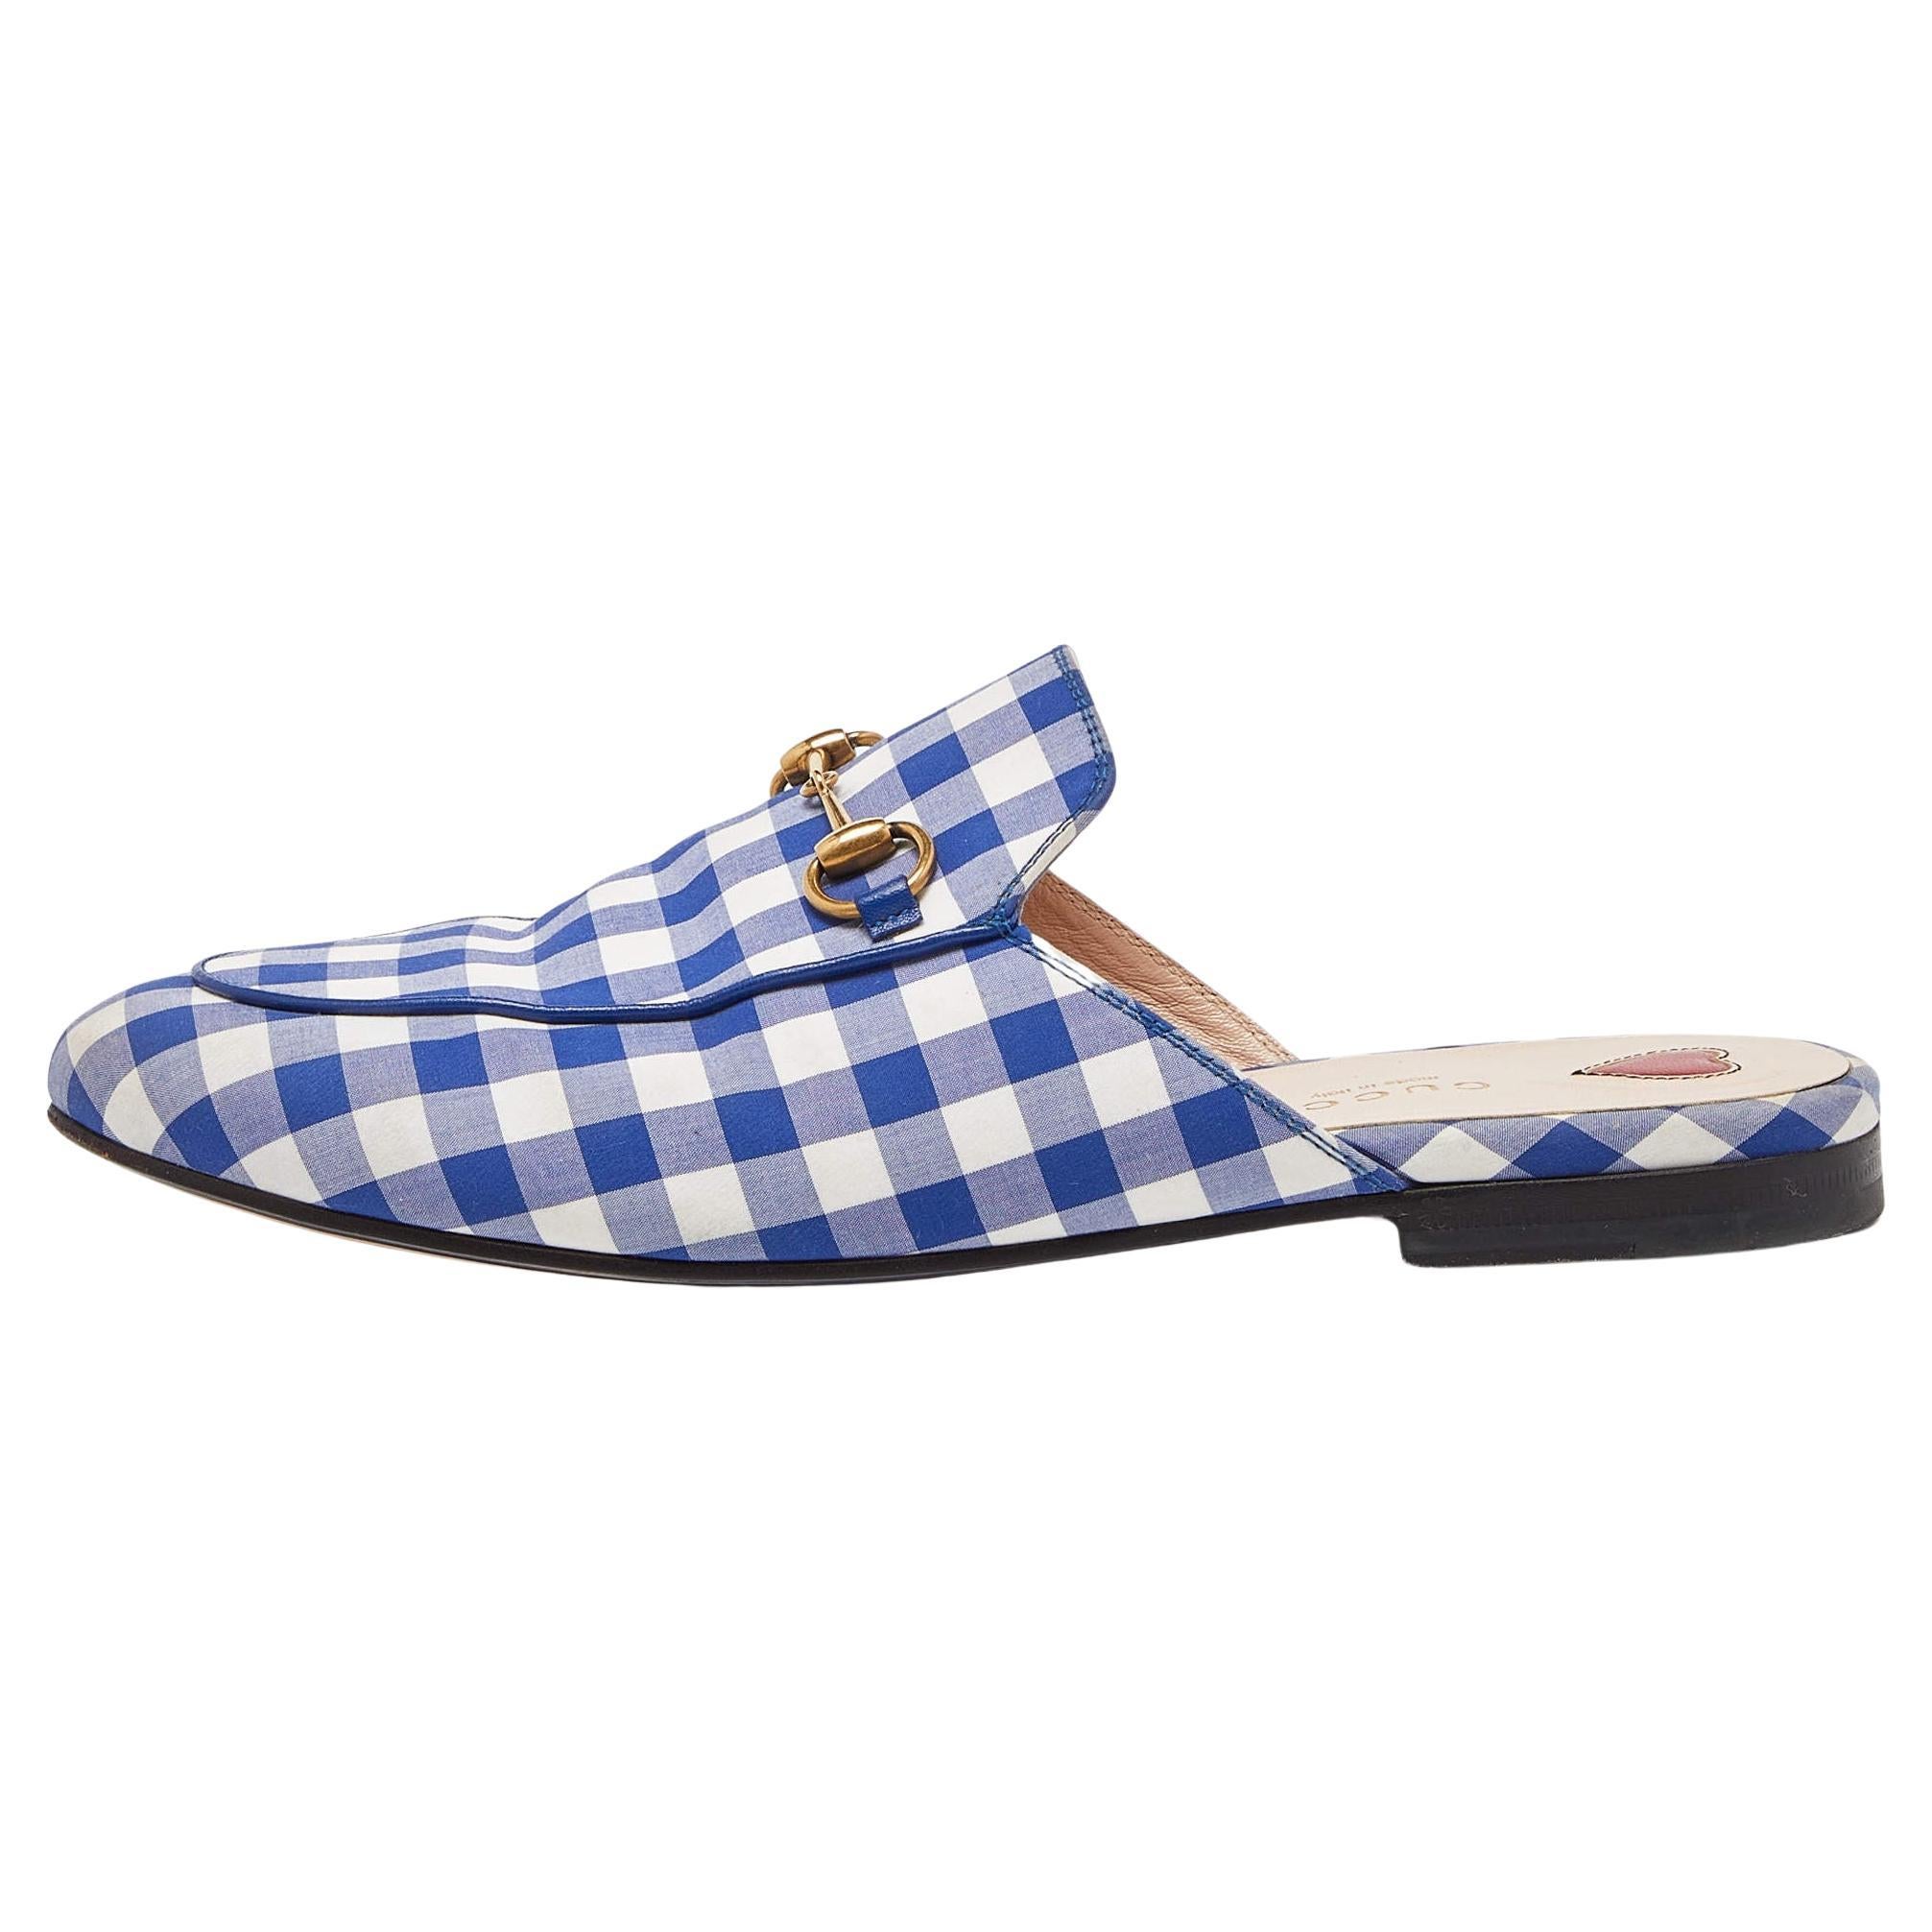 Gucci Blue/White Plaid Fabric Princetown Flat Mules Size 38 For Sale